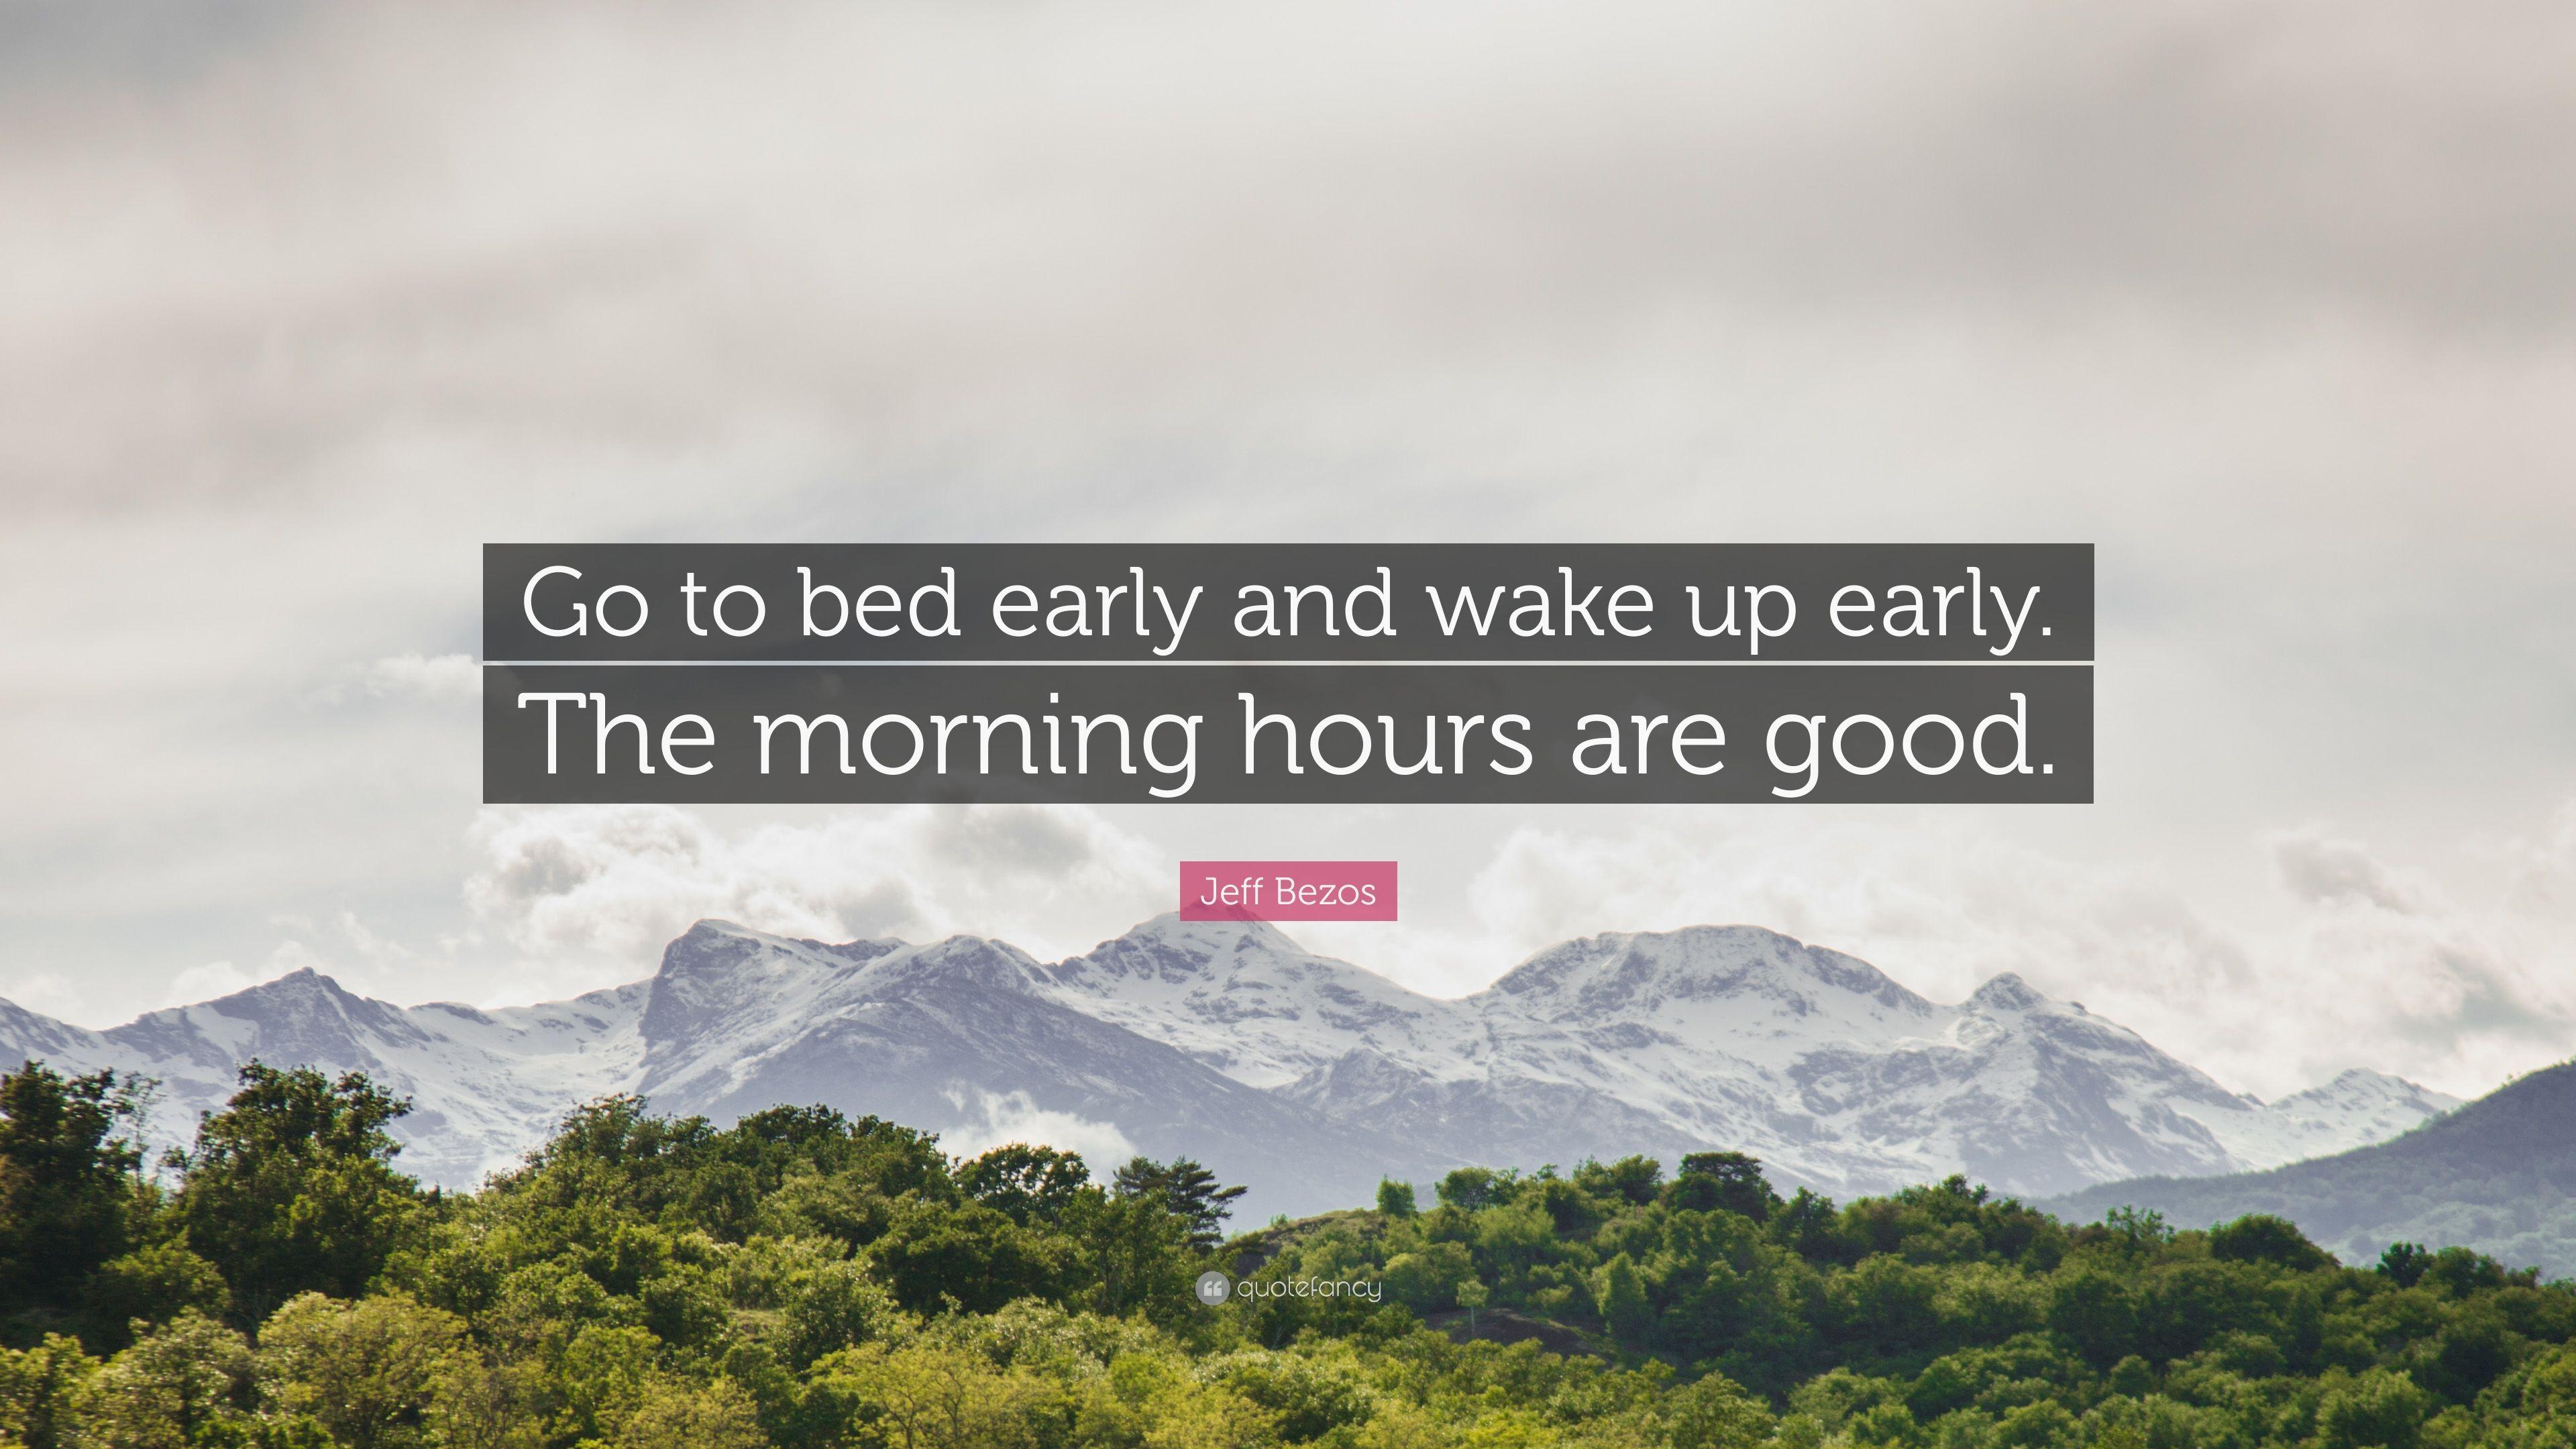 Jeff Bezos Quote: “Go to bed early and wake up early. The morning